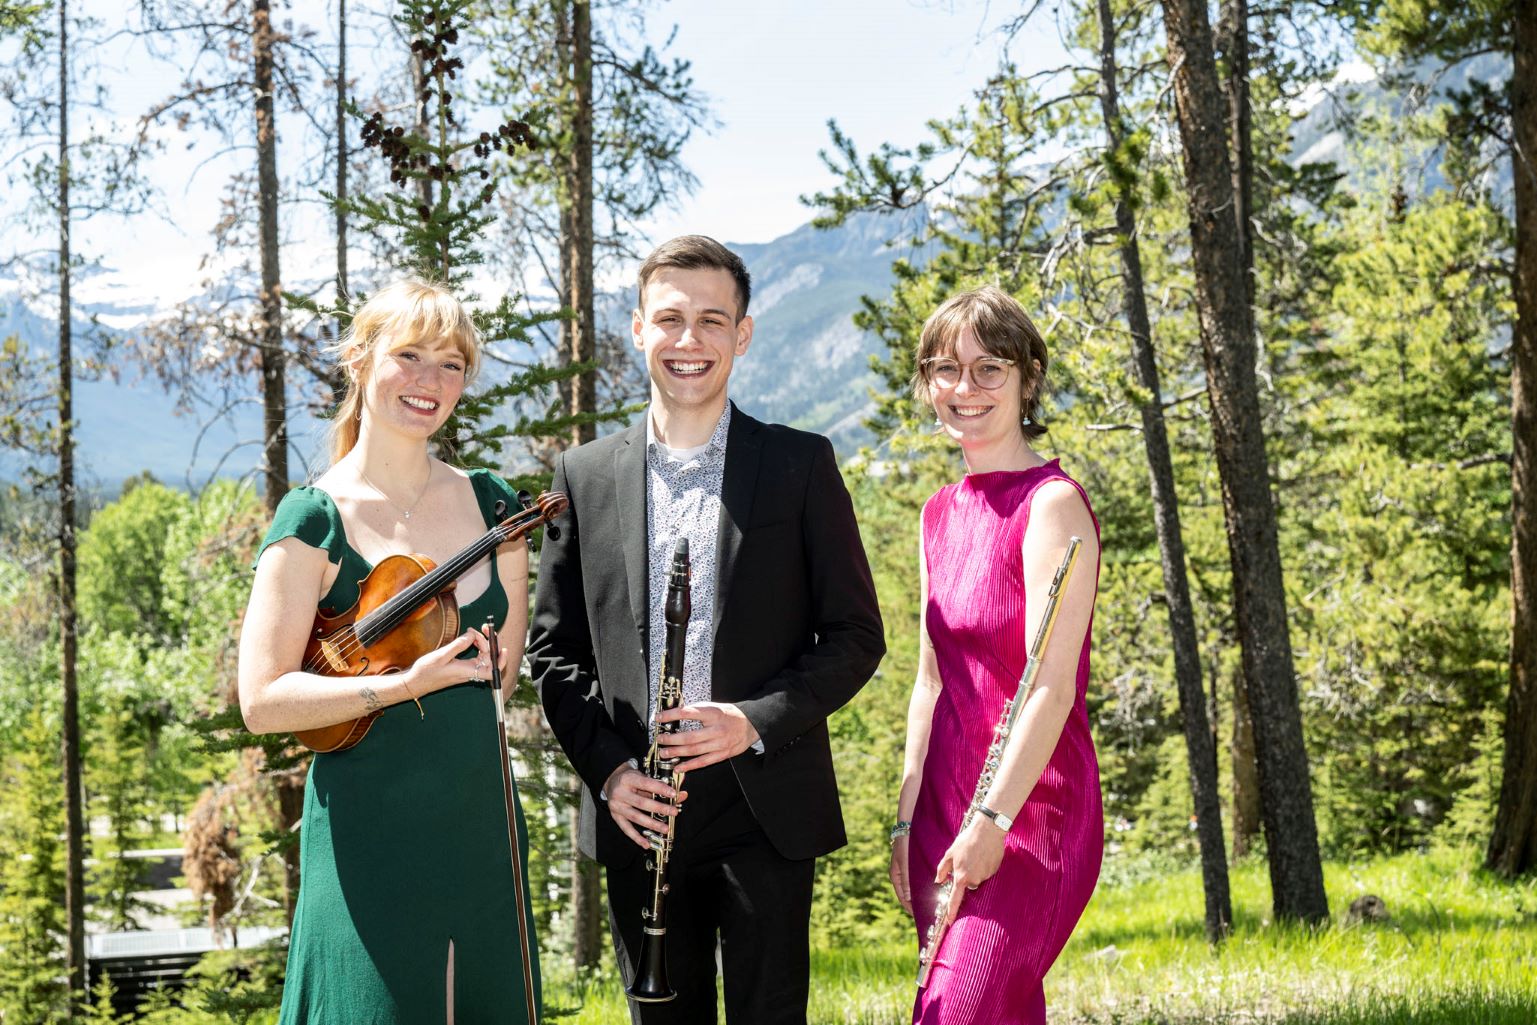 Woman in green dress holding a violin standing beside man in suit with a clarinet in front of him next to a woman in a pink dress holding a flute casually at her side